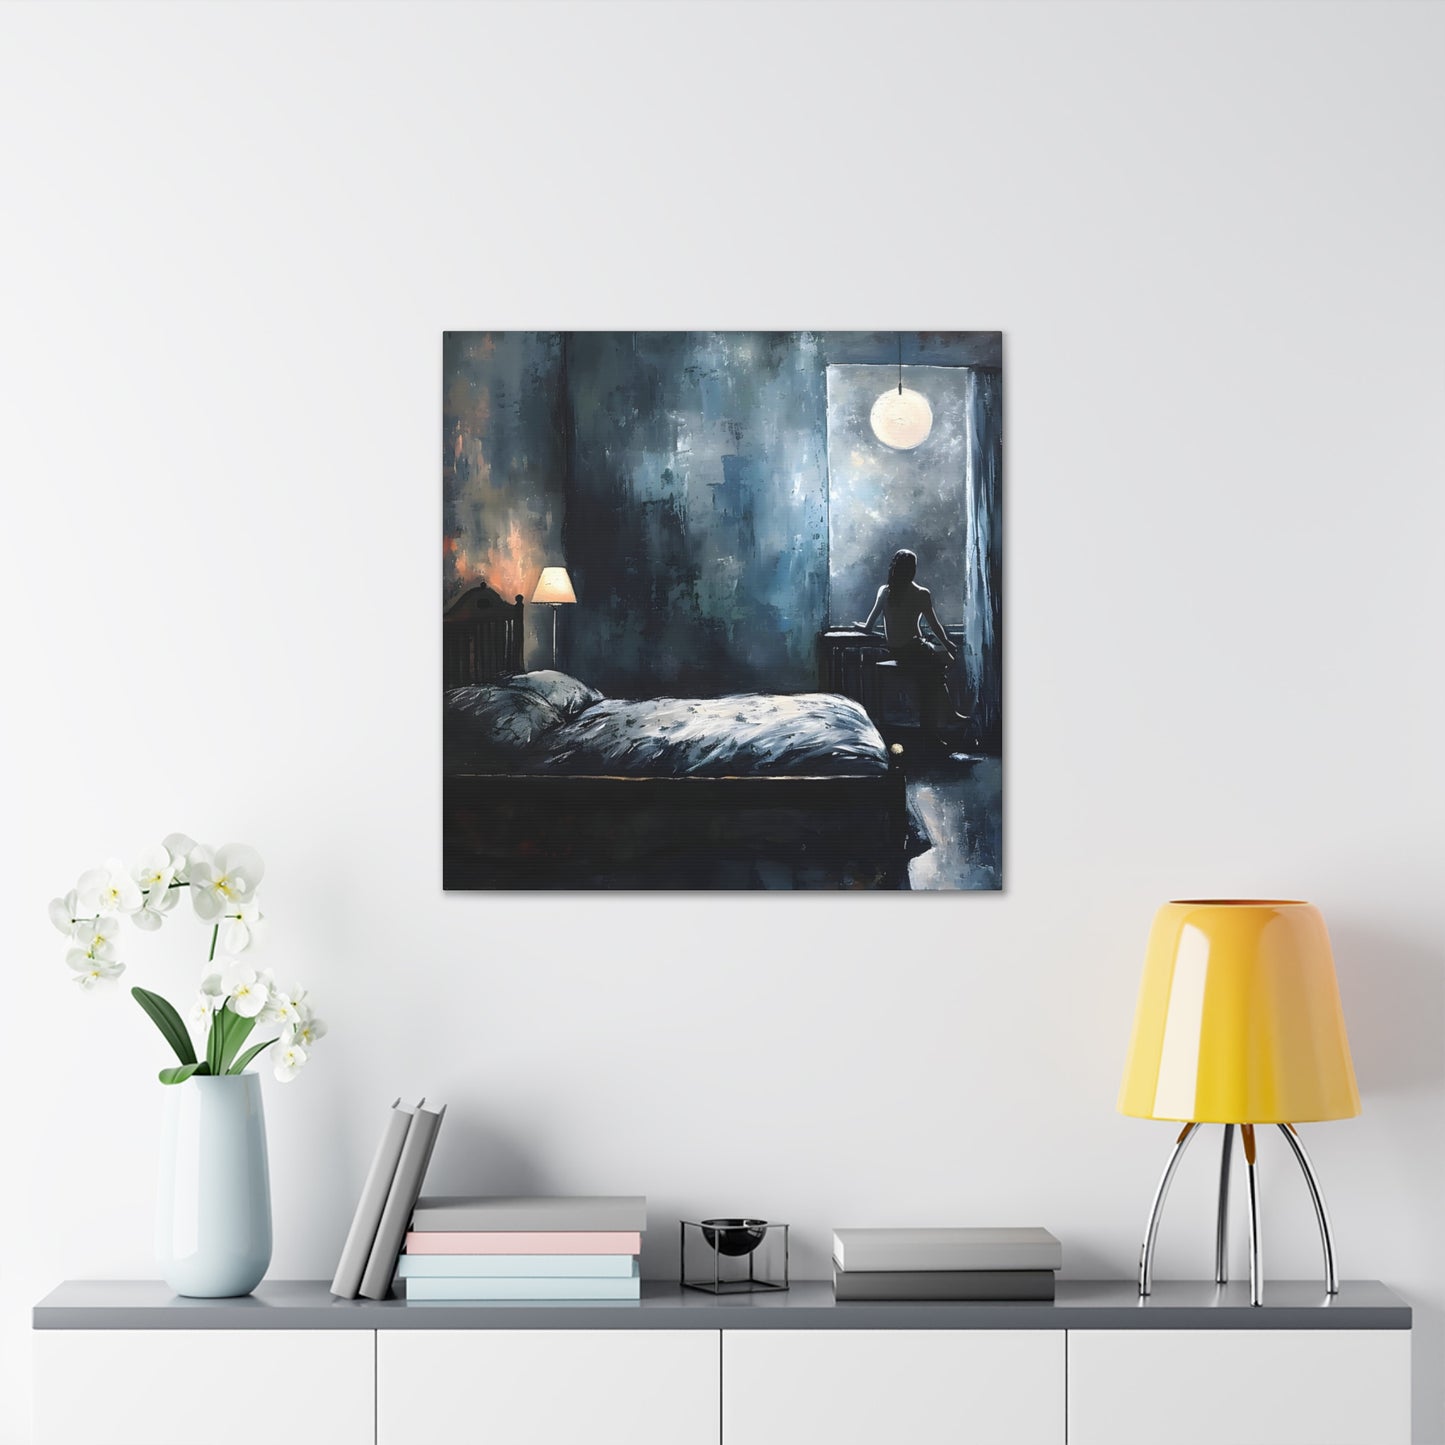 Maxine Steed. Afterglow Silence. Exclusive Canvas Print